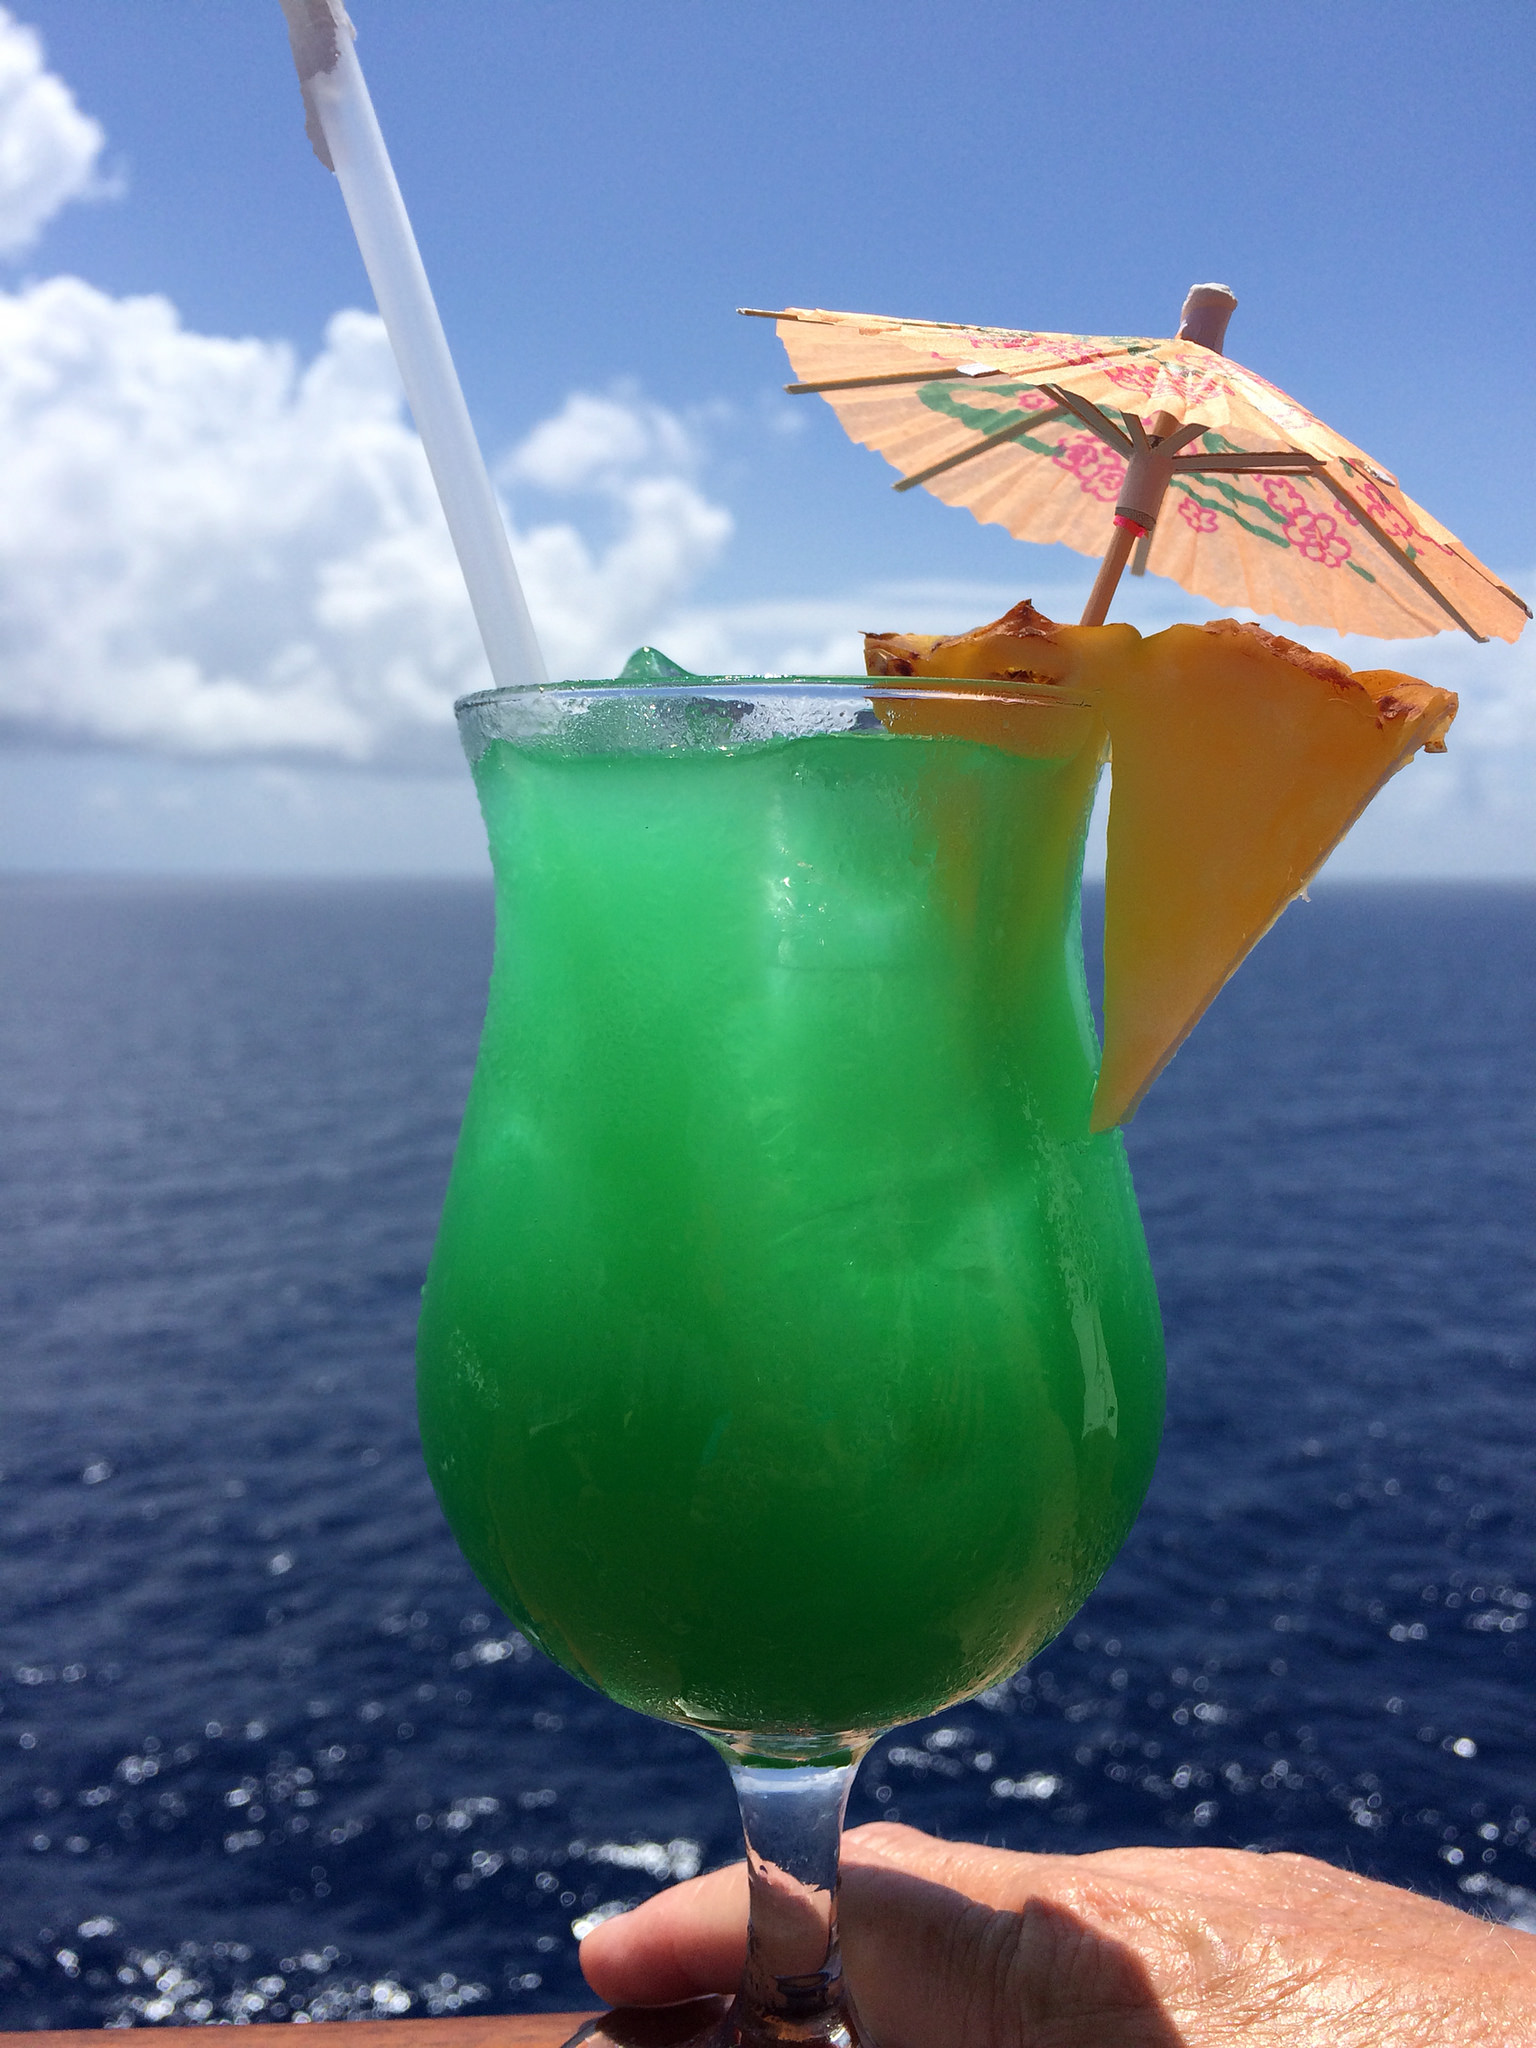 carnival cruise line tips